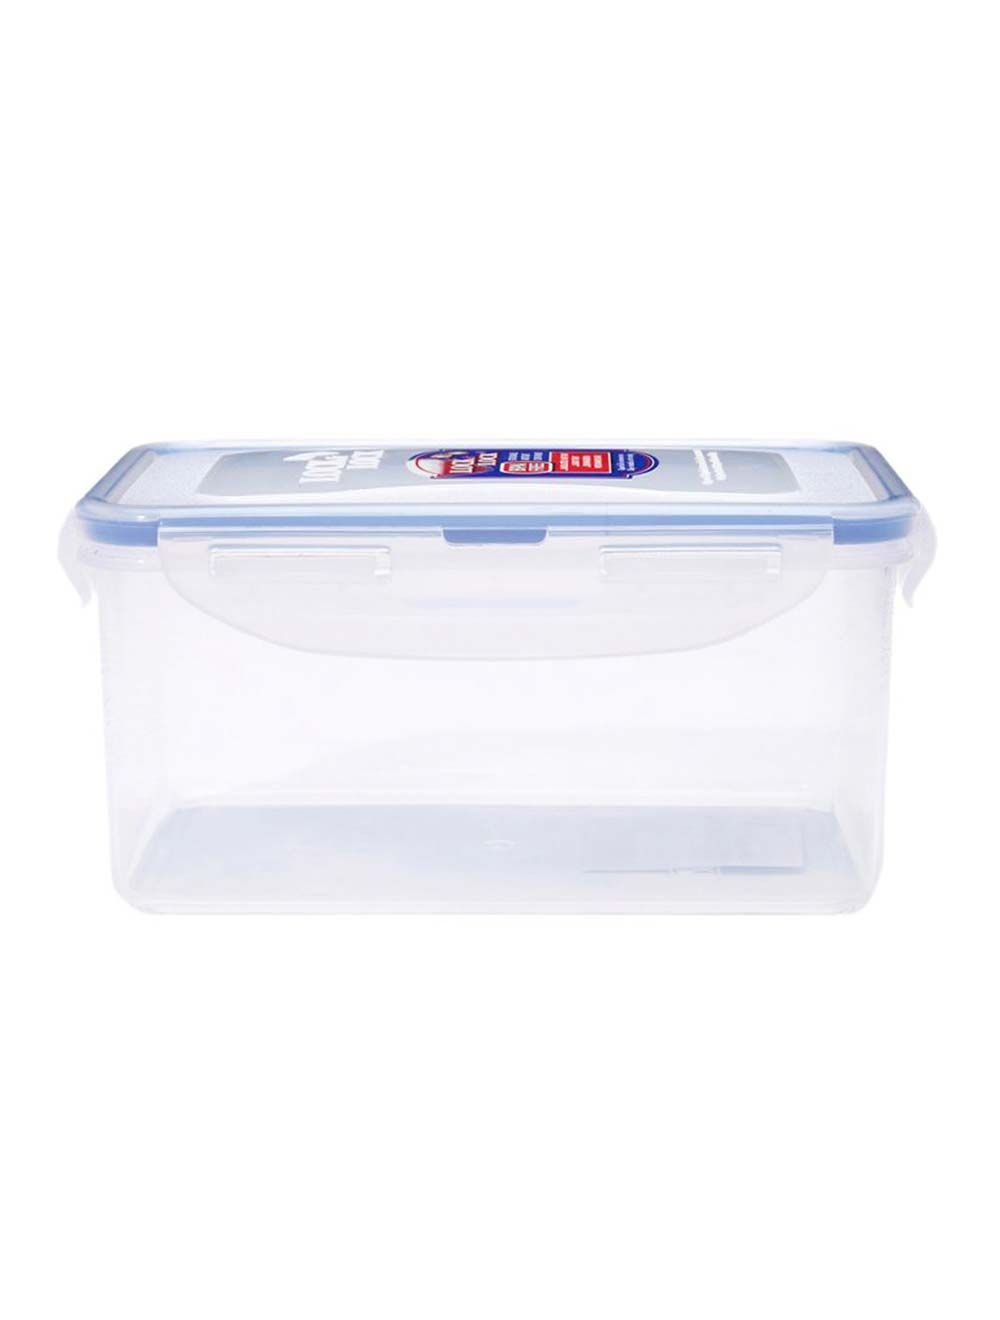 Lock & Lock Food Container Rectangle 1.1 Litres-HPL815D